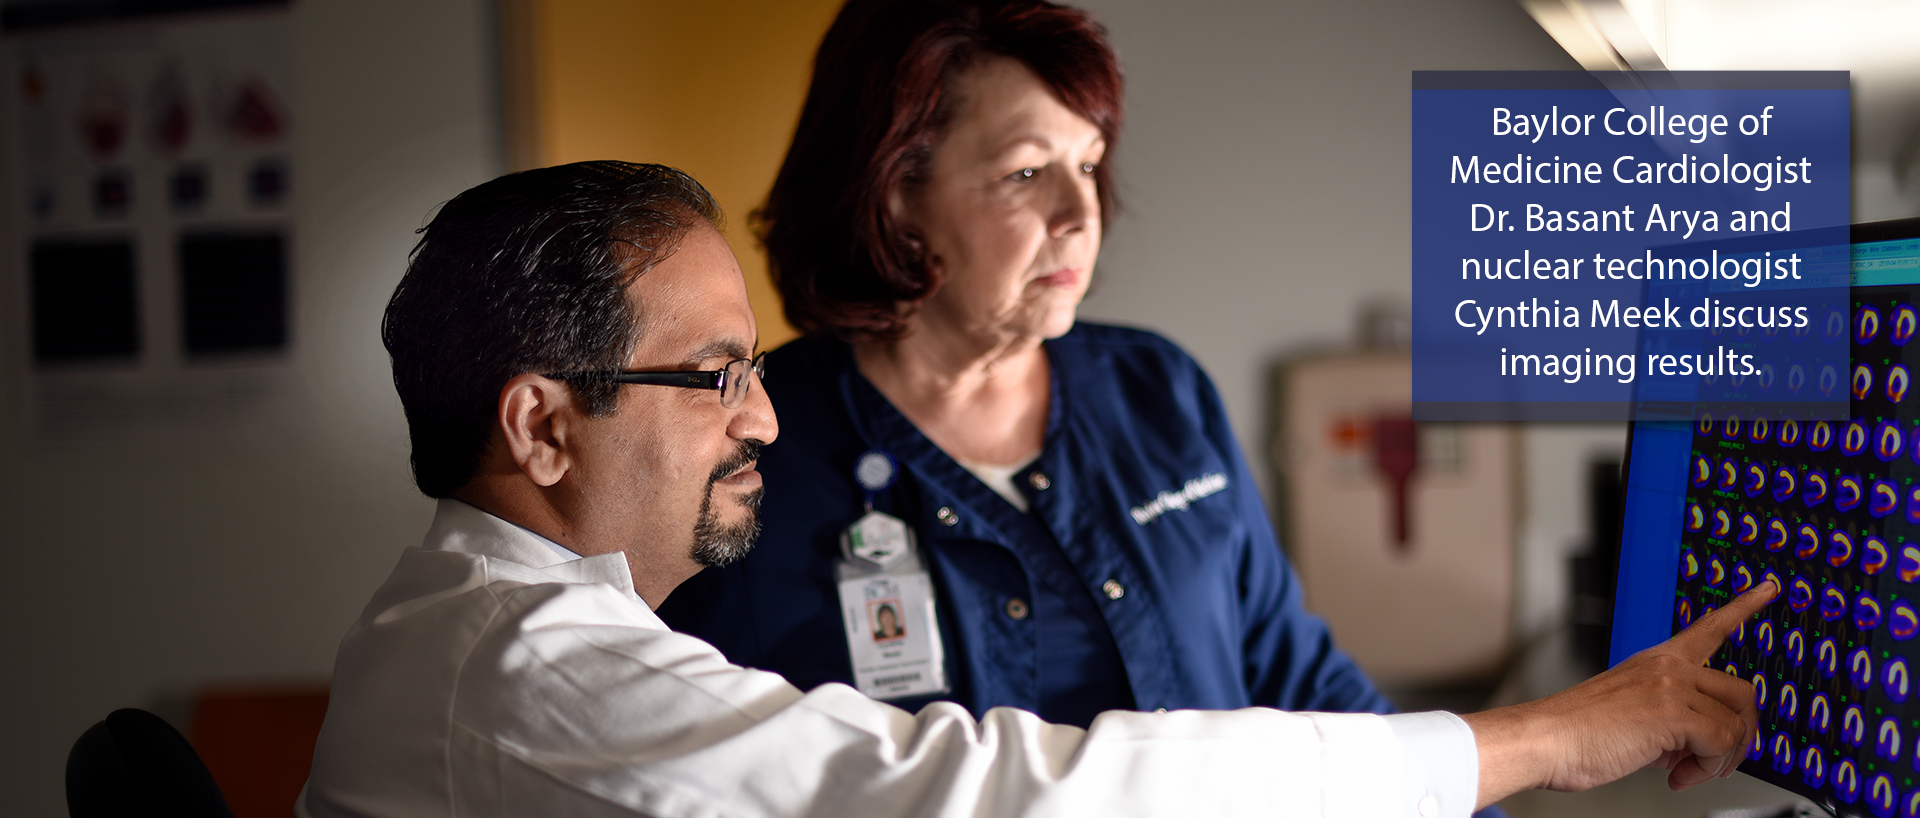 Baylor College of Medicine Cardiologist Dr. Basant Arya and nuclear technologist Cynthia Meek discuss imaging results. 